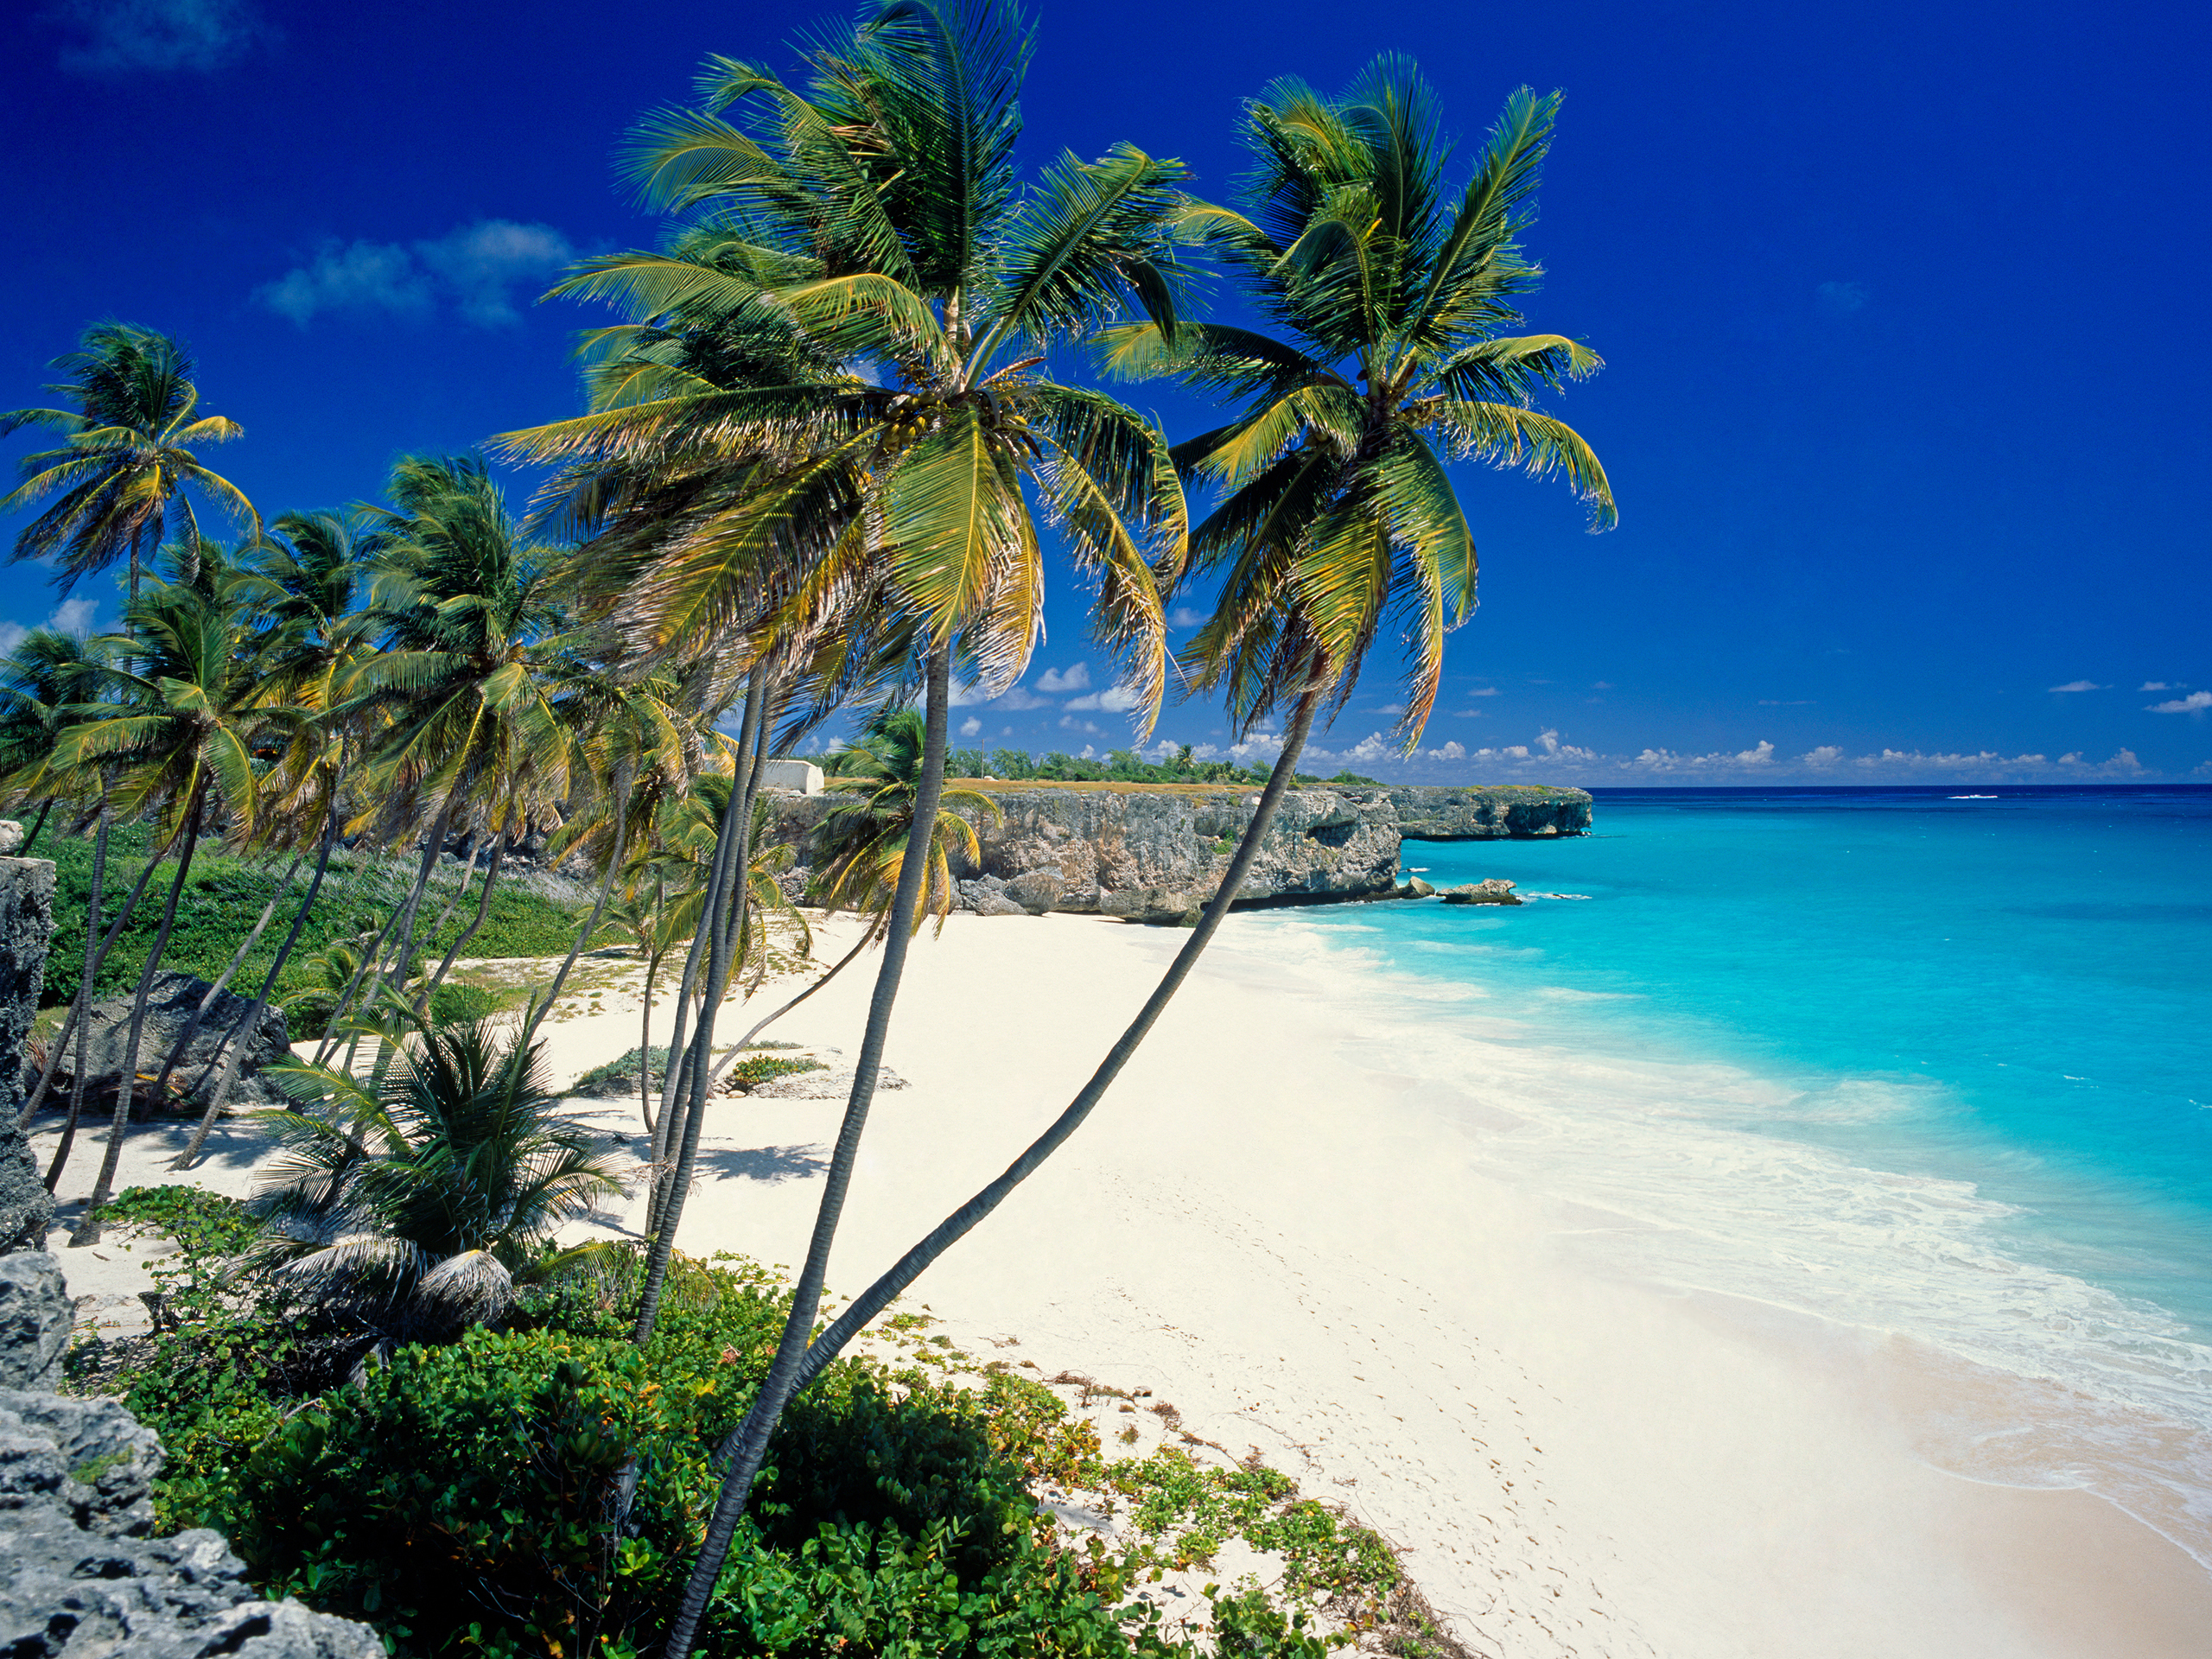 Sunny beach in barbados wallpapers and images - wallpapers ...